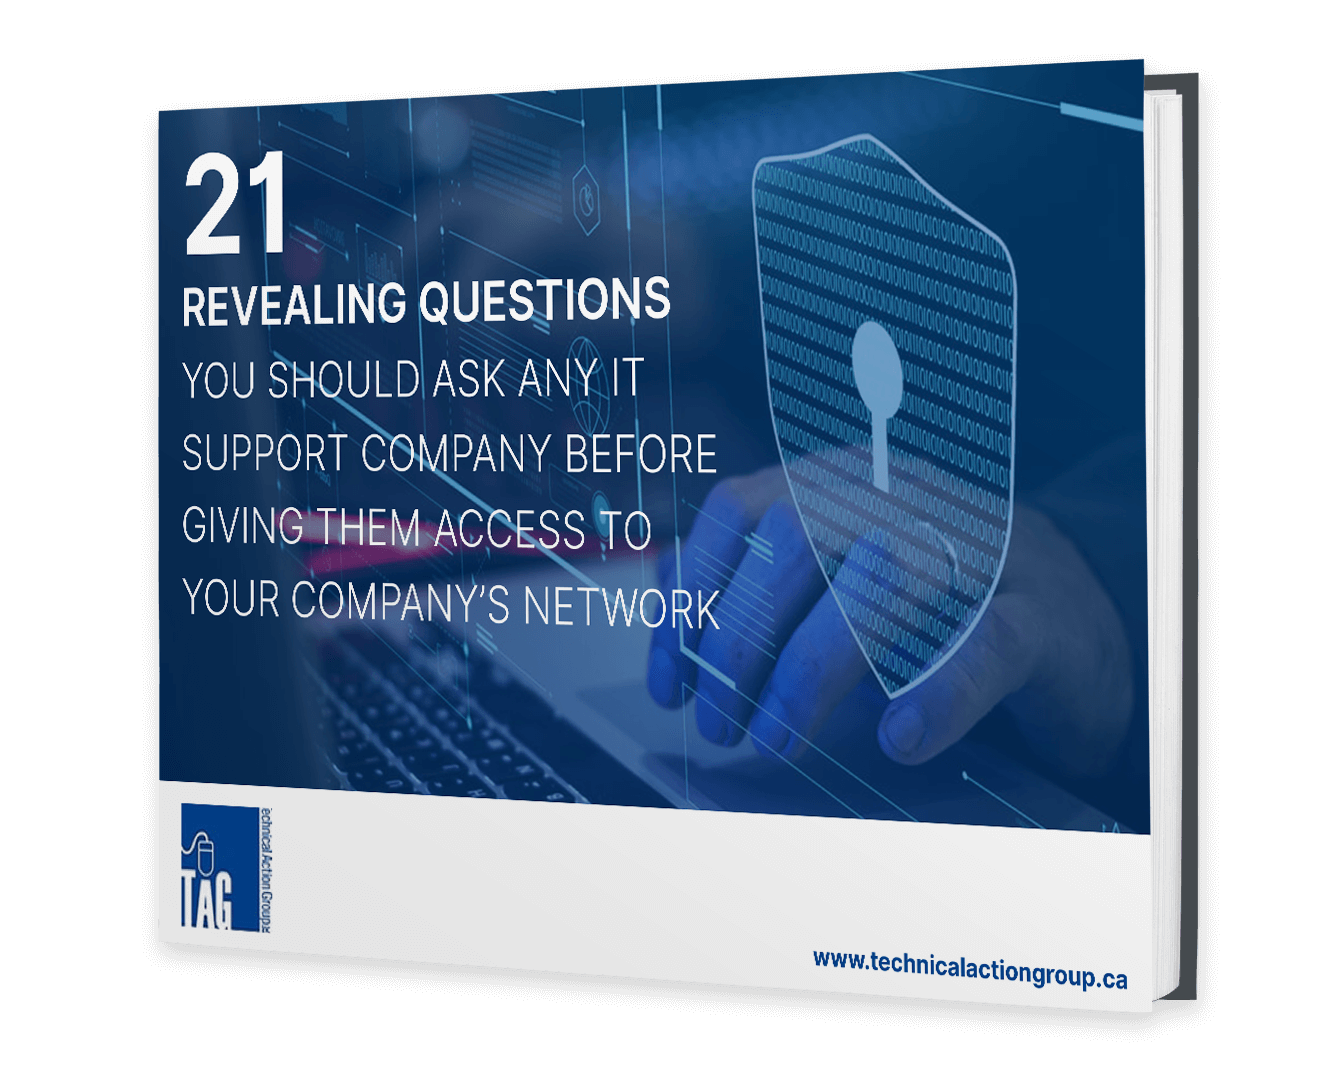 21 REVEALING QUESTIONS